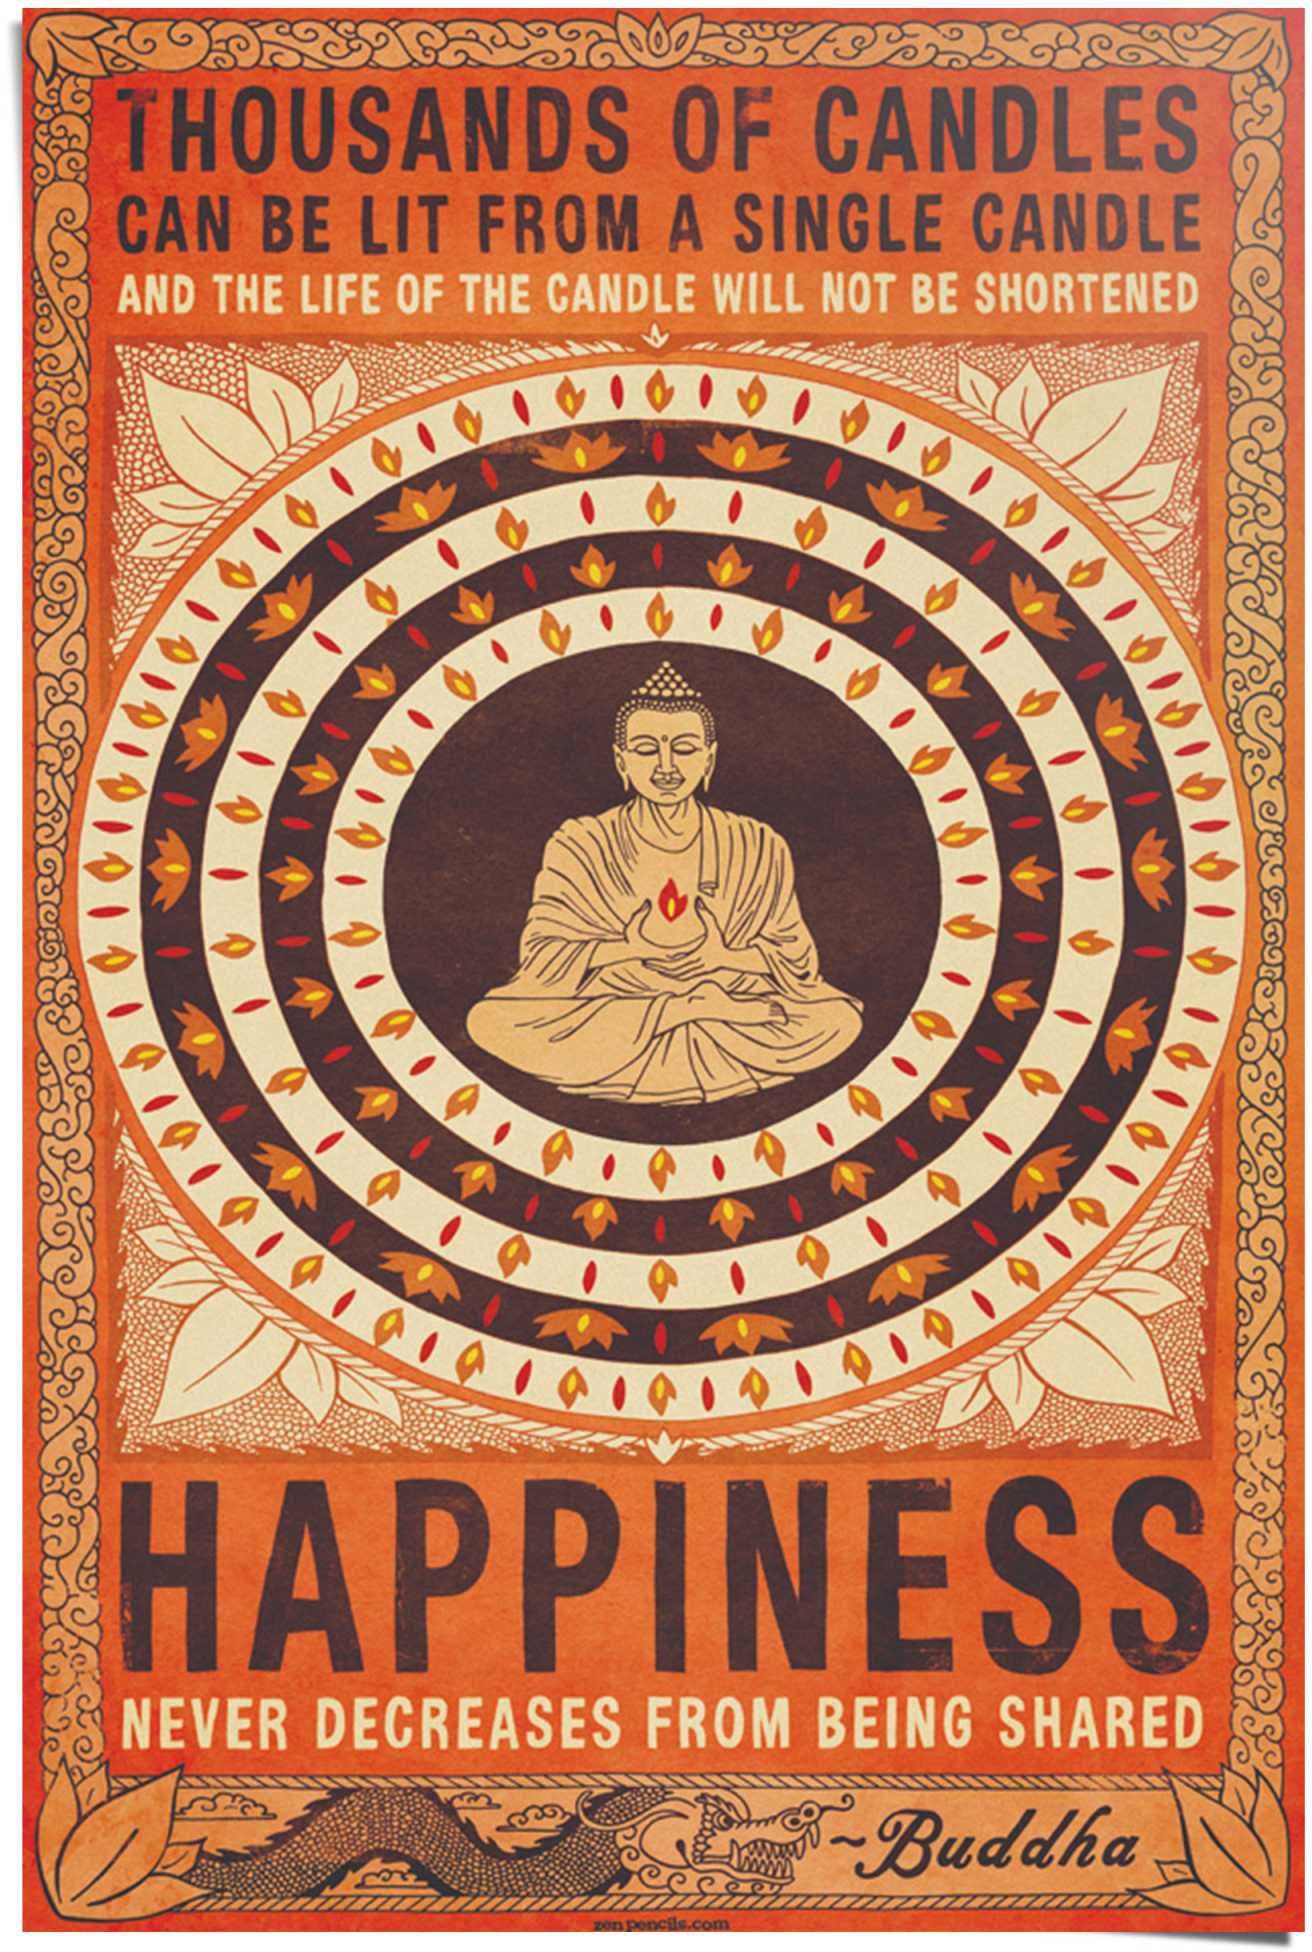 Buddha Reinders! St) Happiness, Poster (1